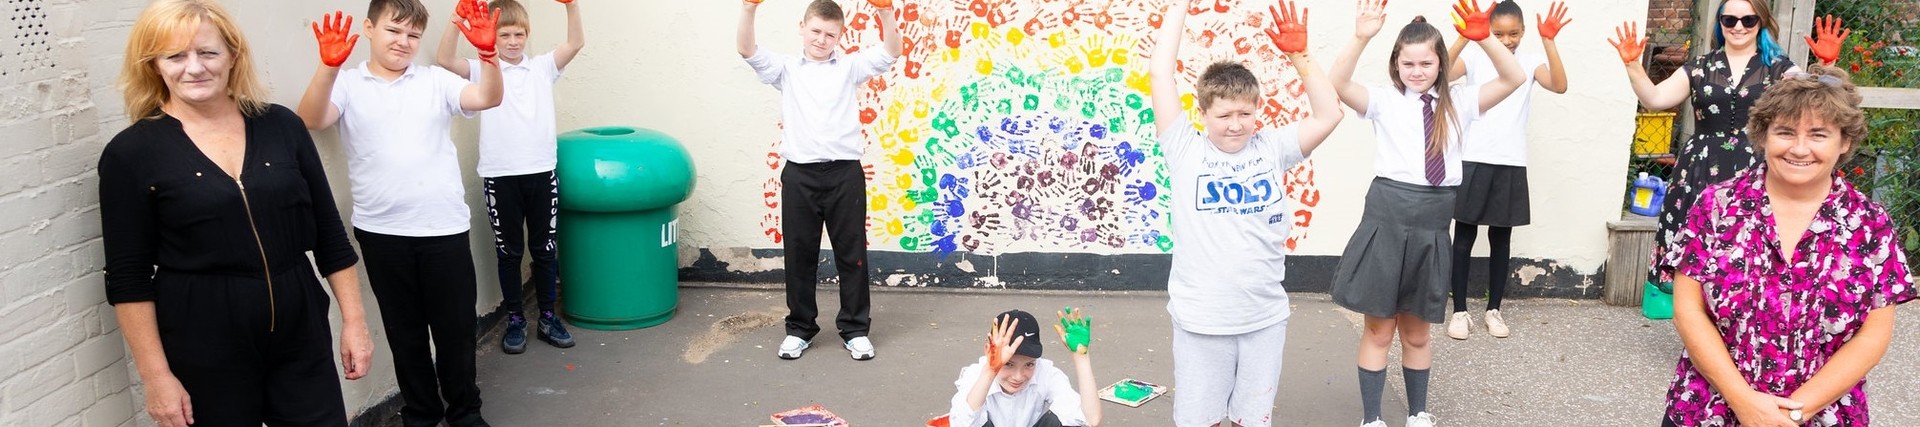 Students and teachers standing against a wall mural of a rainbow they painted with their hands